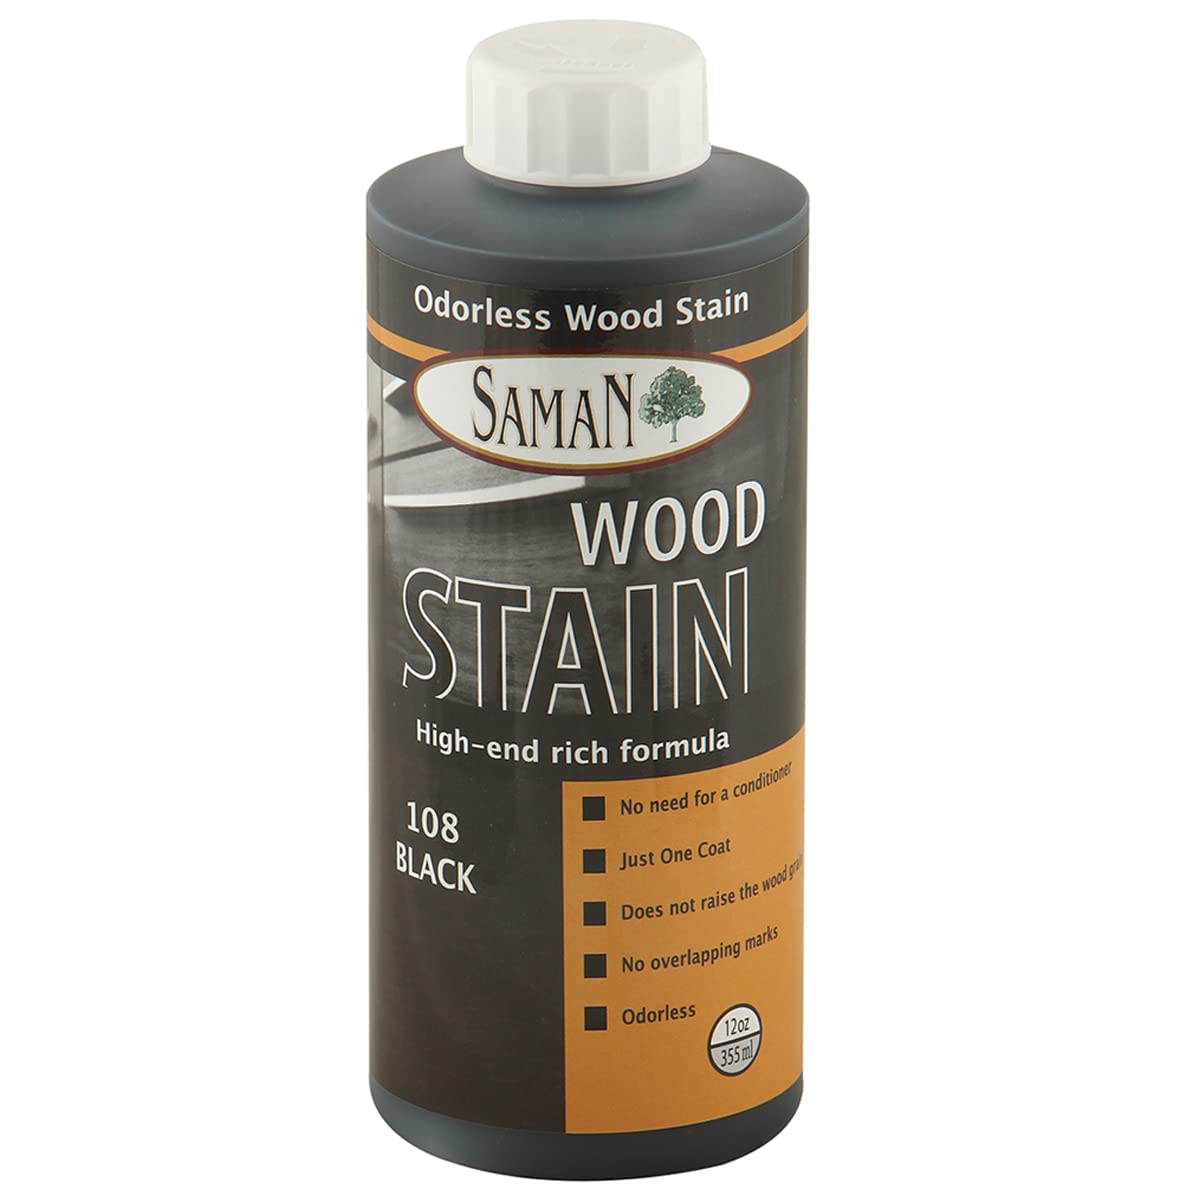 SamaN Interior Water Based Wood Stain - Natural Stain for Furniture, Moldings, Wood Paneling, Cabinets (Black TEW-108-12, 12 oz)